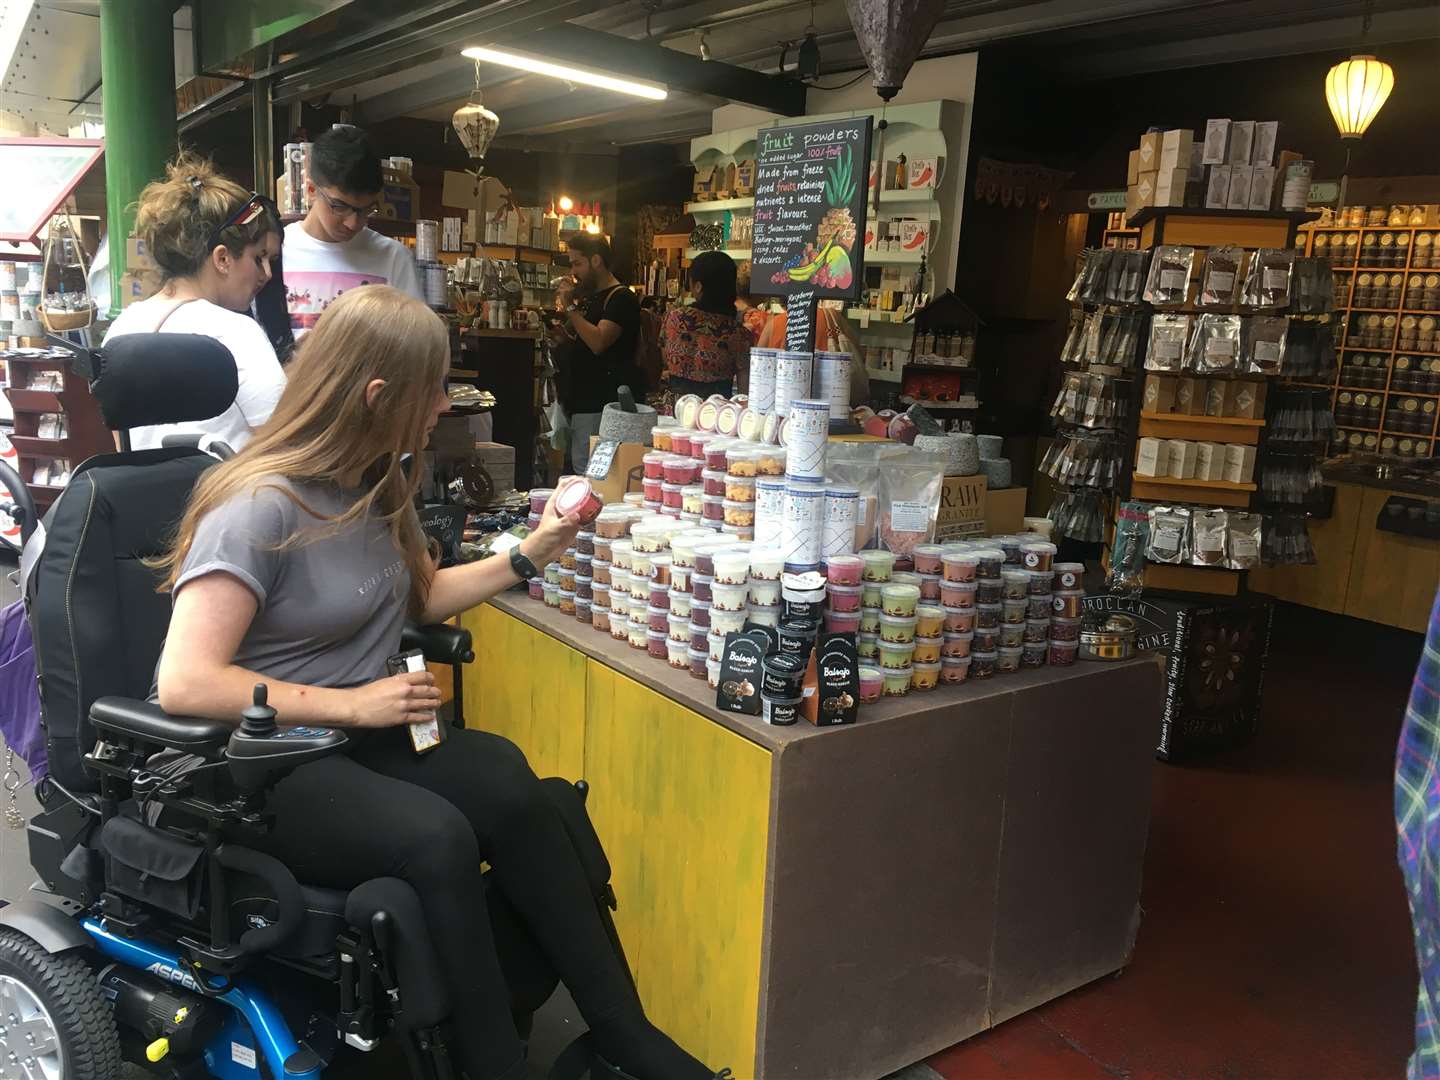 Hannah Bullard using her wheelchair at Borough Market where she bought spices for one of her food blog recipes